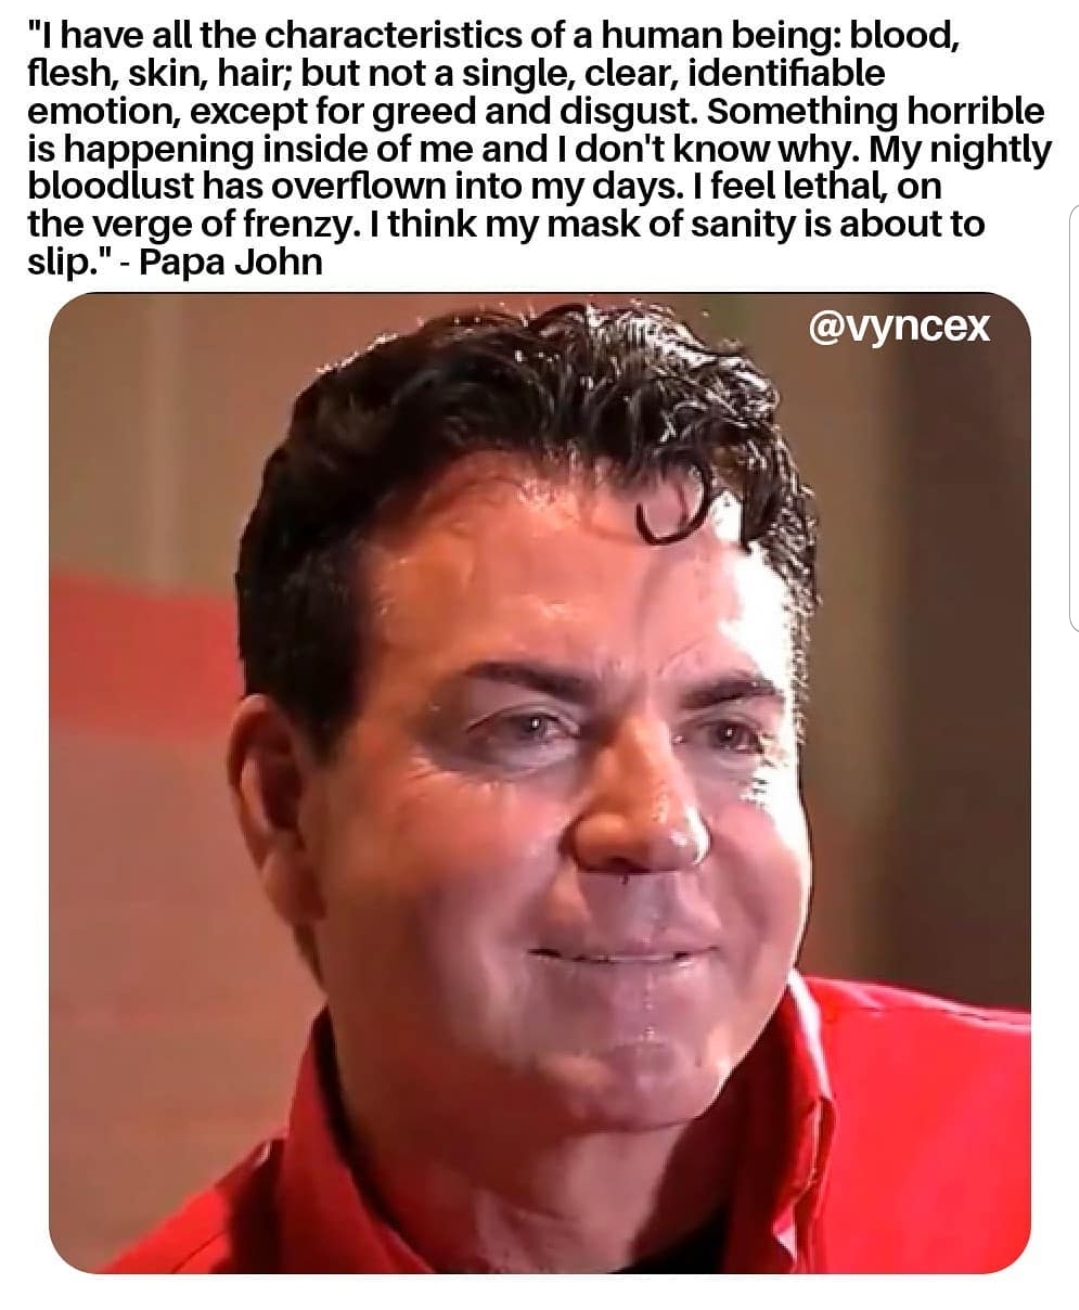 papa johns meme - "I have all the characteristics of a human being blo...